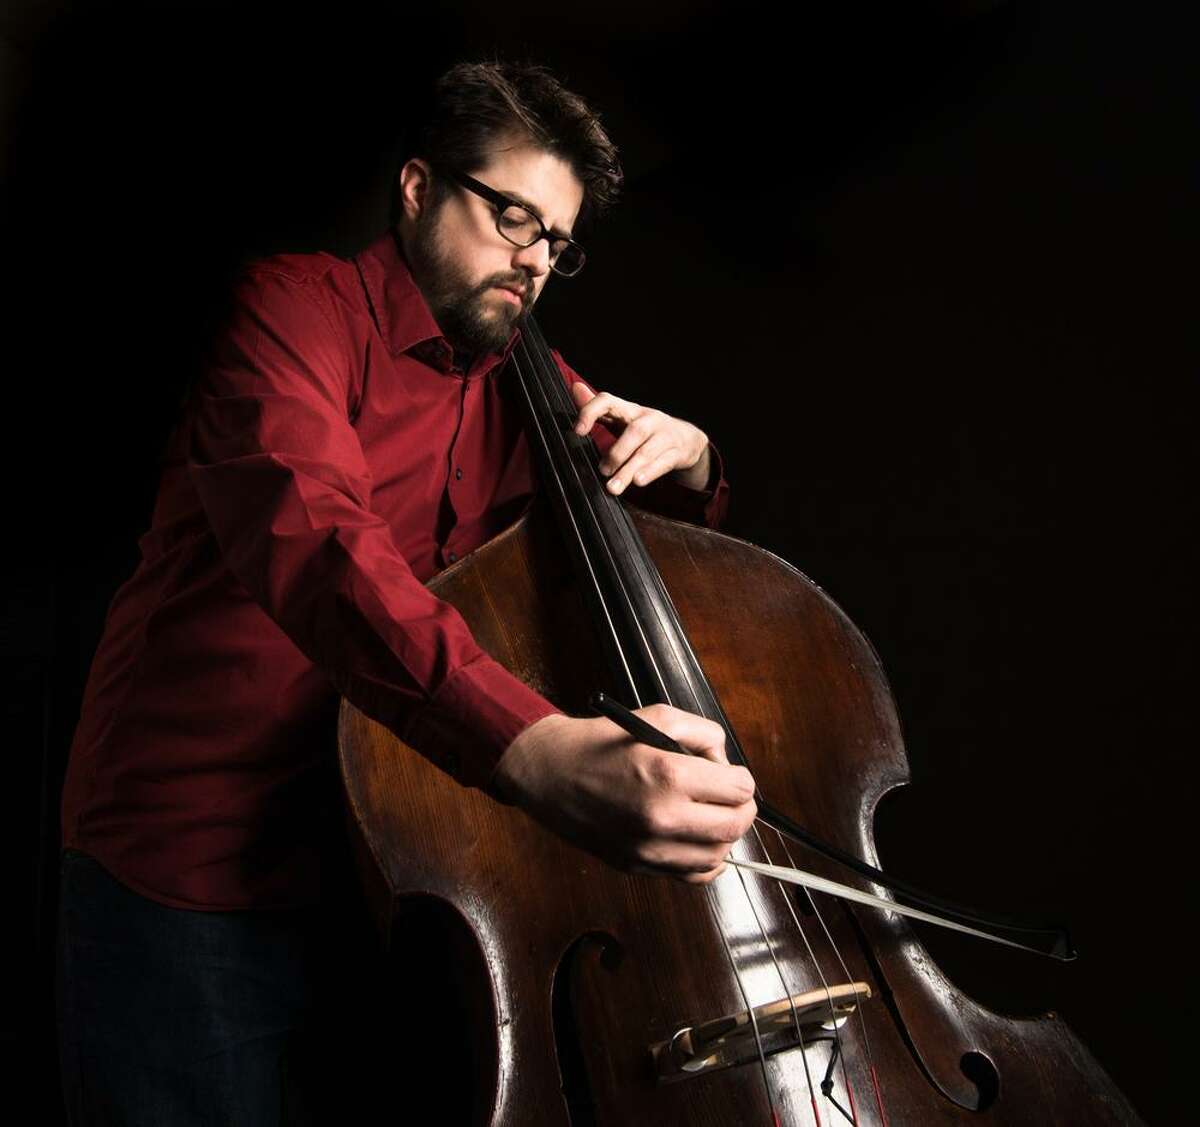 Bassist/composer Jeff Denson performs music from his new album on Saturday, Aug. 11, at the San Jose Jazz Summer Fest.